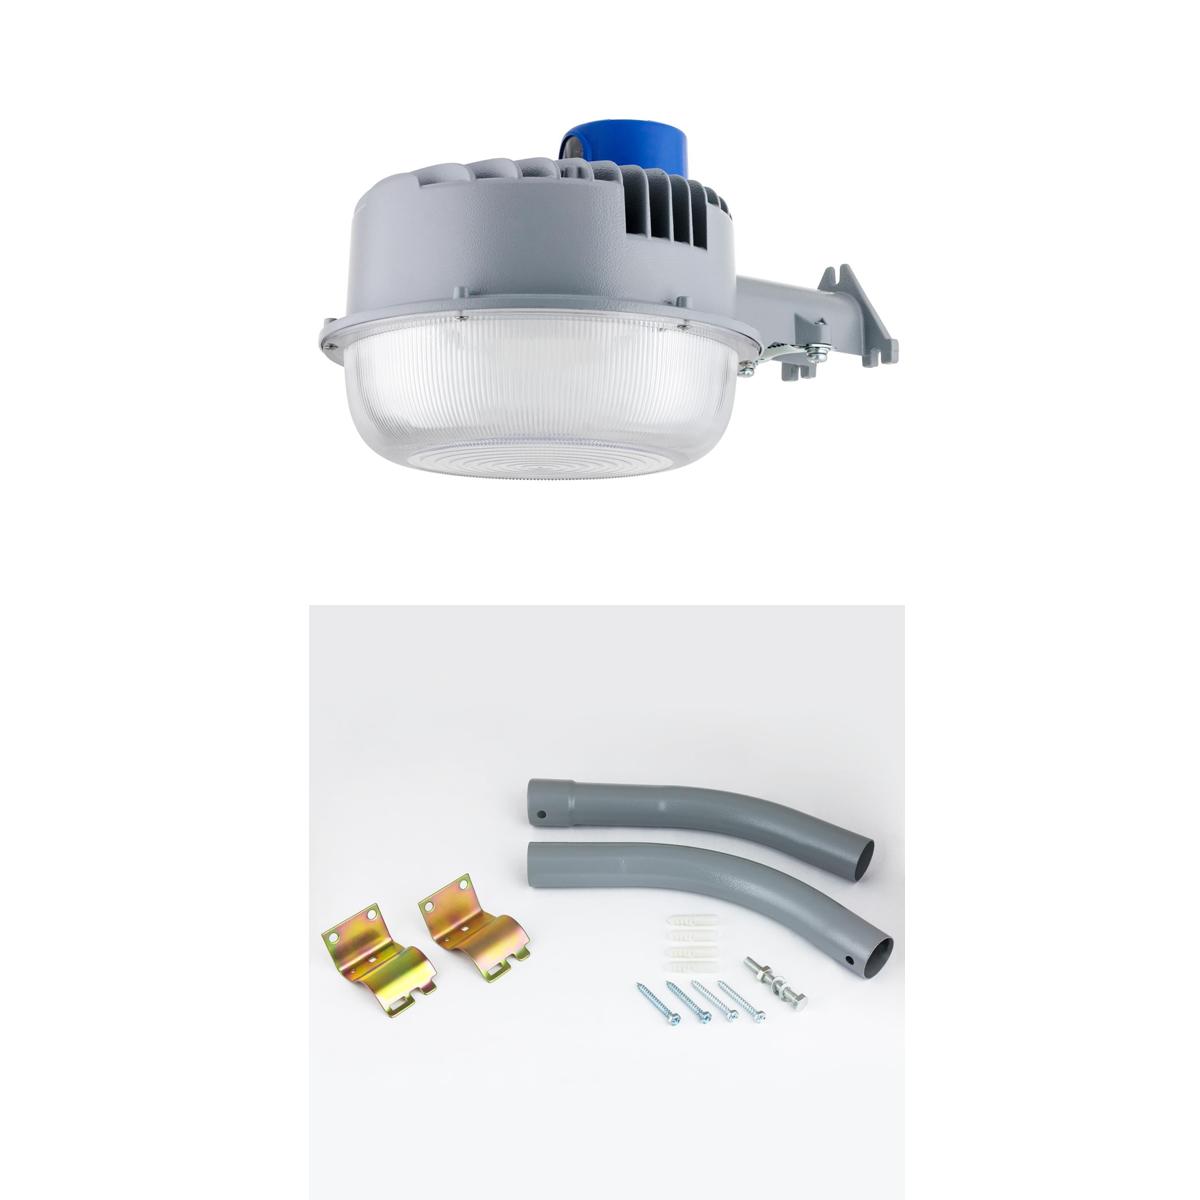 Roadway Light Fixture, With Built-In Photocell (Dusk to Dawn)